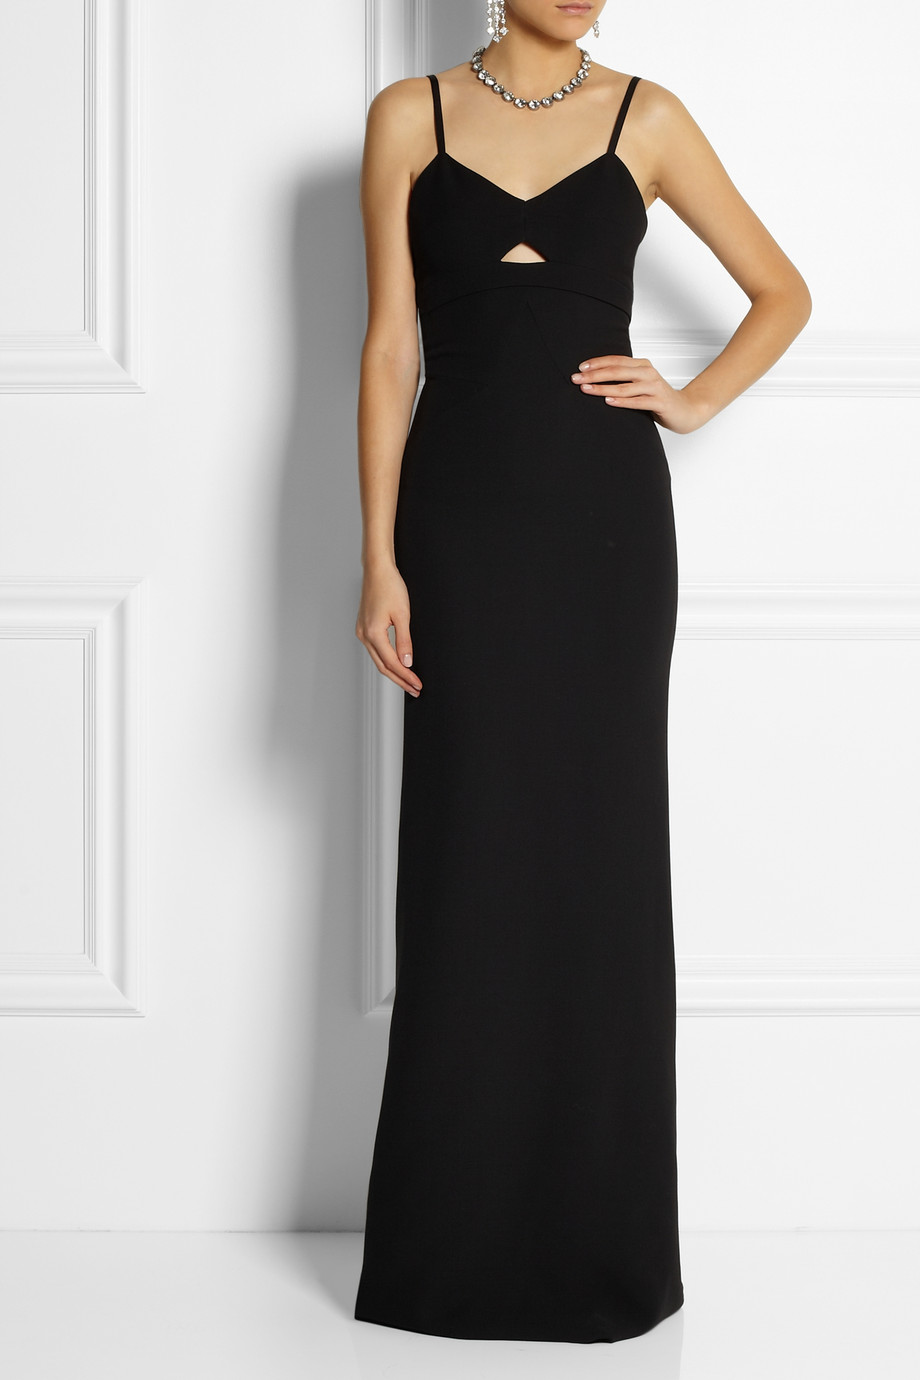 Lyst - Victoria beckham Cutout Silk And Wool-Blend Gown in Black